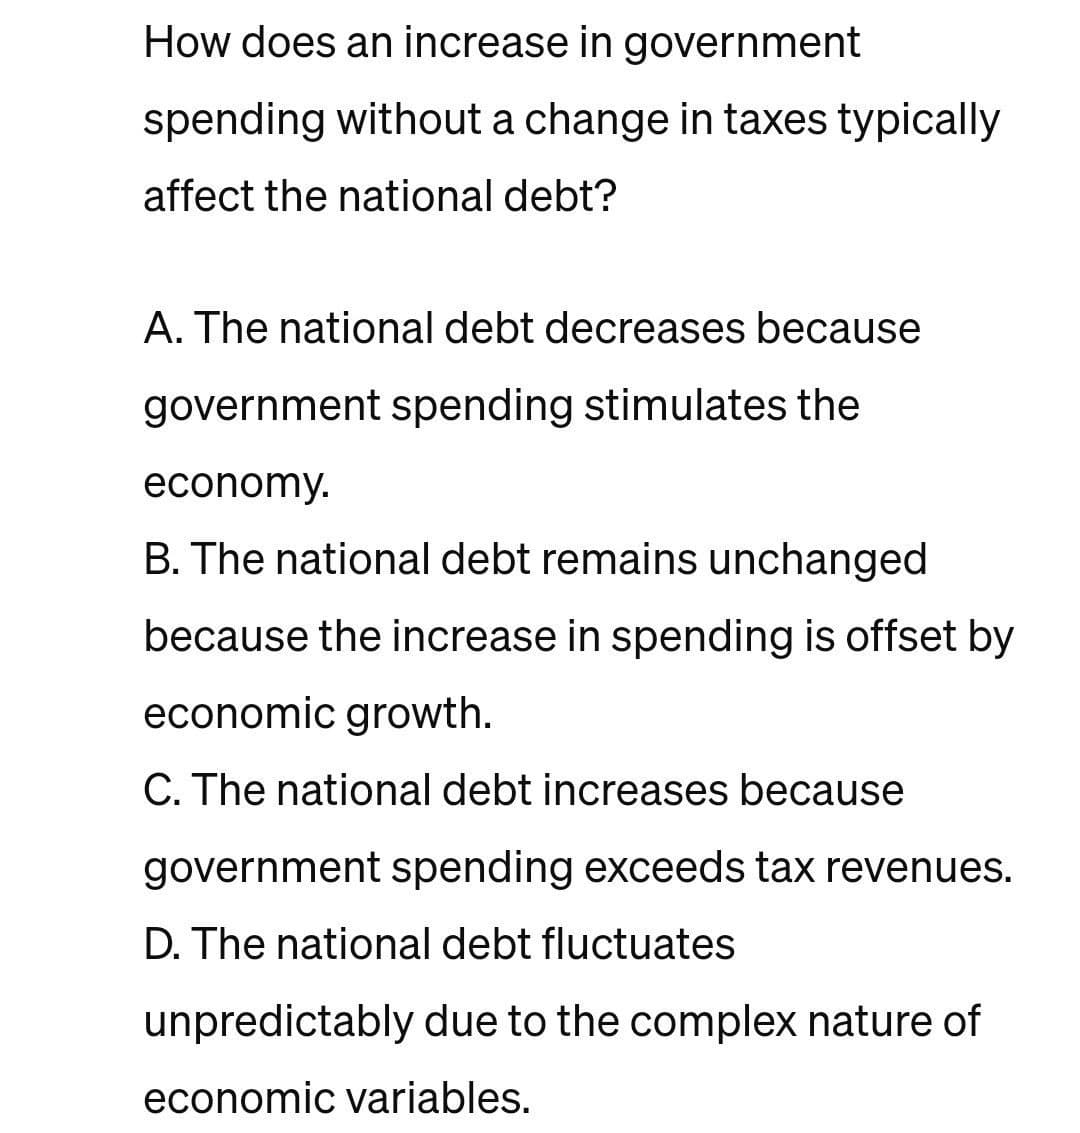 How does an increase in government
spending without a change in taxes typically
affect the national debt?
A. The national debt decreases because
government spending stimulates the
economy.
B. The national debt remains unchanged
because the increase in spending is offset by
economic growth.
C. The national debt increases because
government spending exceeds tax revenues.
D. The national debt fluctuates
unpredictably due to the complex nature of
economic variables.